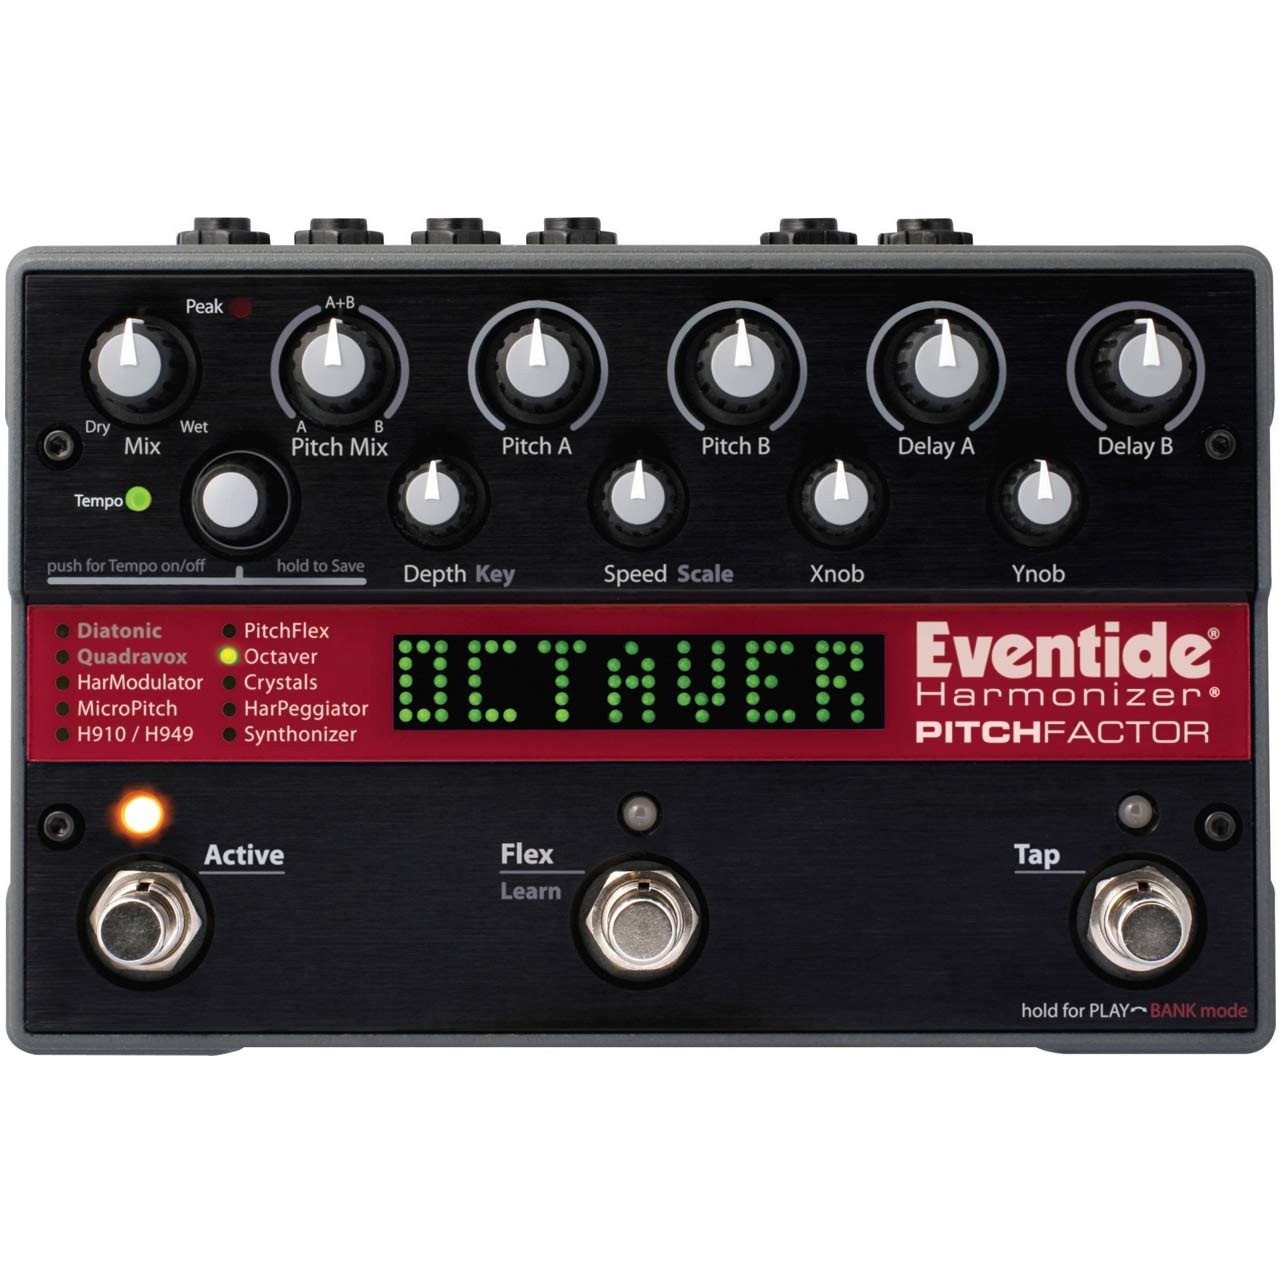 Pedals & Effects - Eventide PitchFactor - Harmonizer Effects Processor